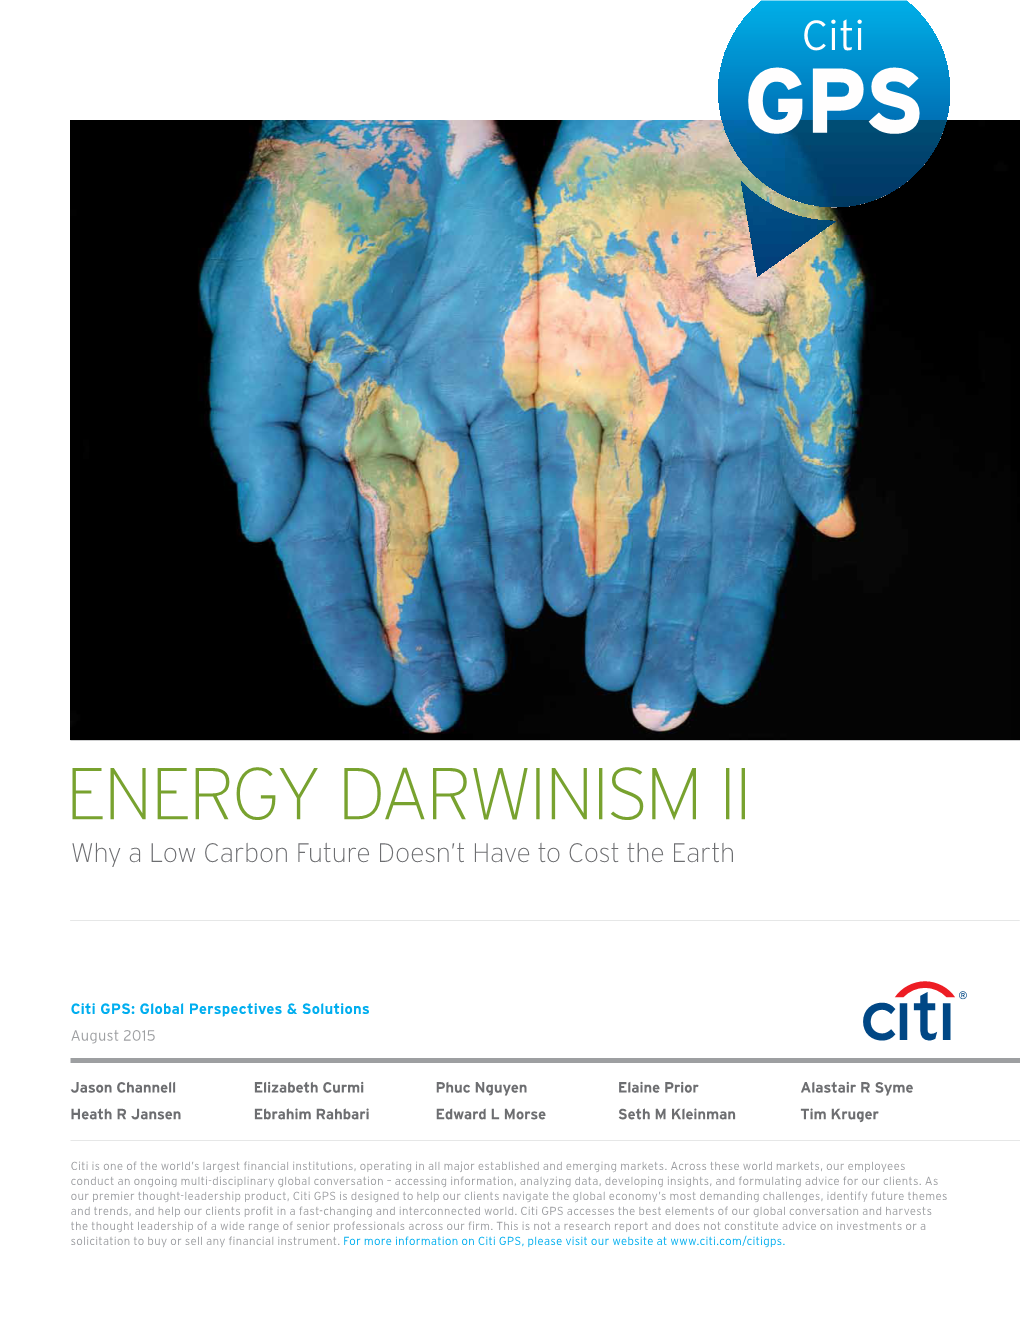 ENERGY DARWINISM II Why a Low Carbon Future Doesn’T Have to Cost the Earth